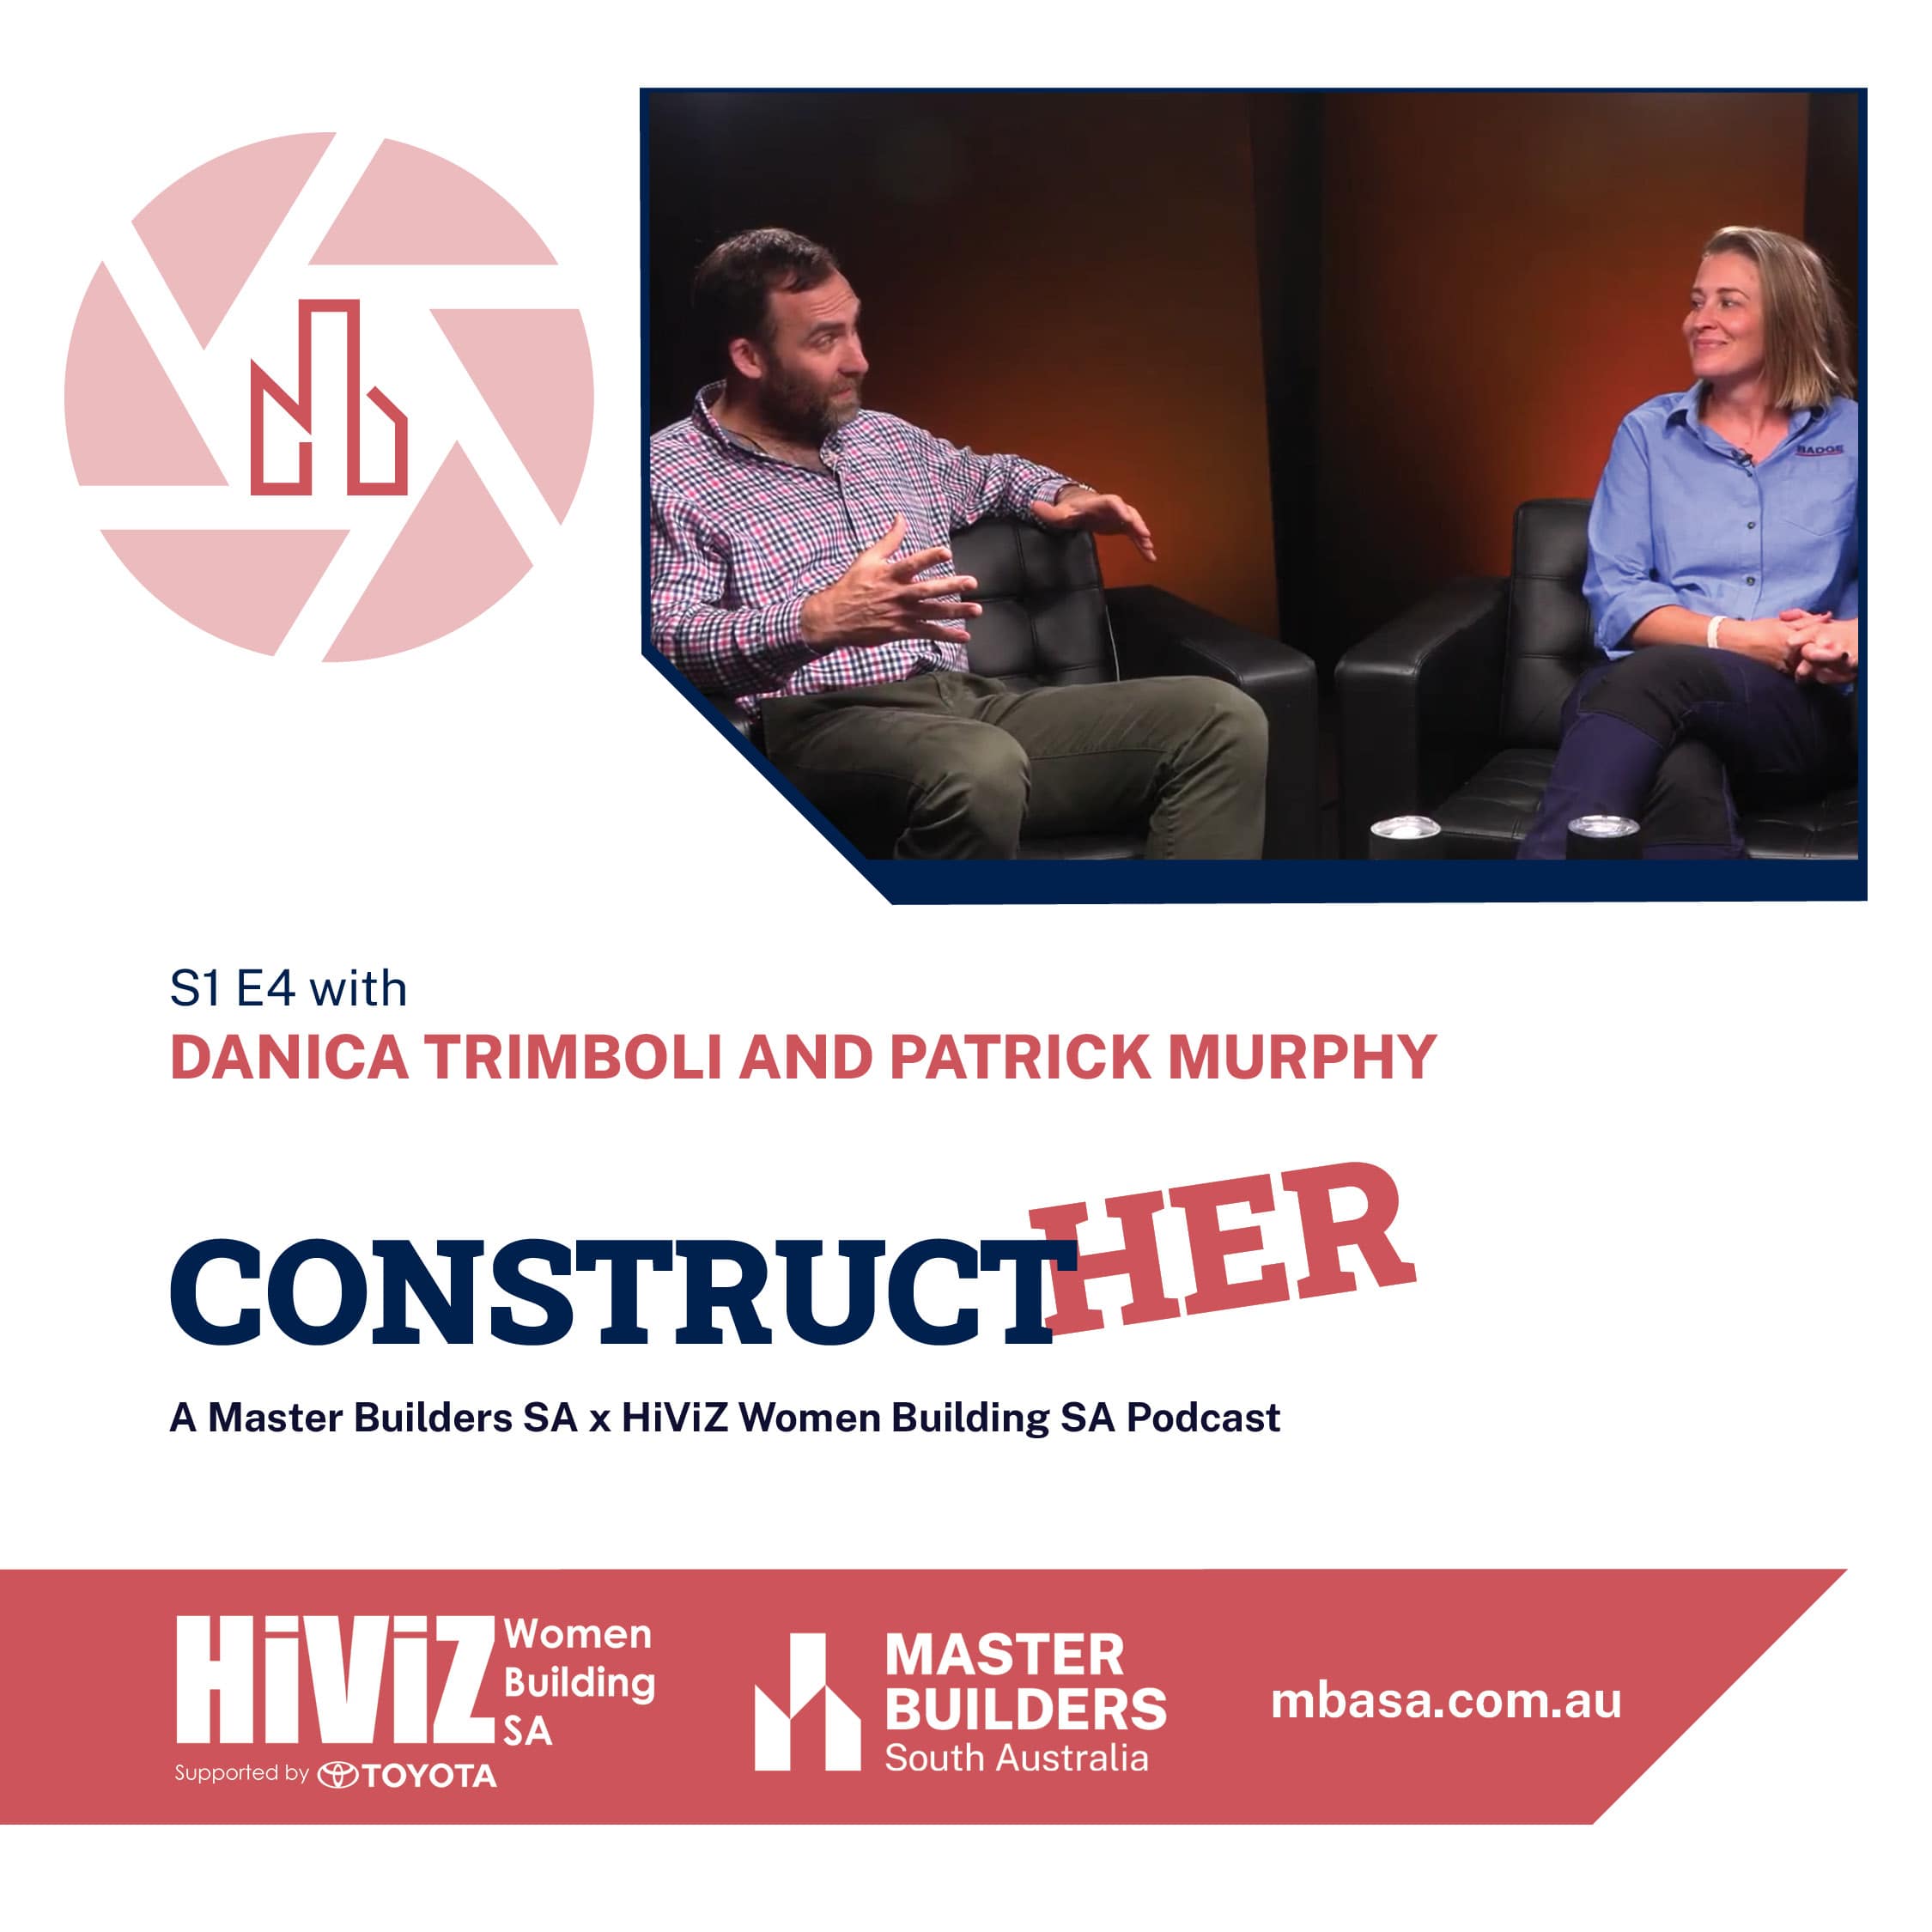 ConstructHER-Podcast-Tile-Artwork-Danica-and-Patrick